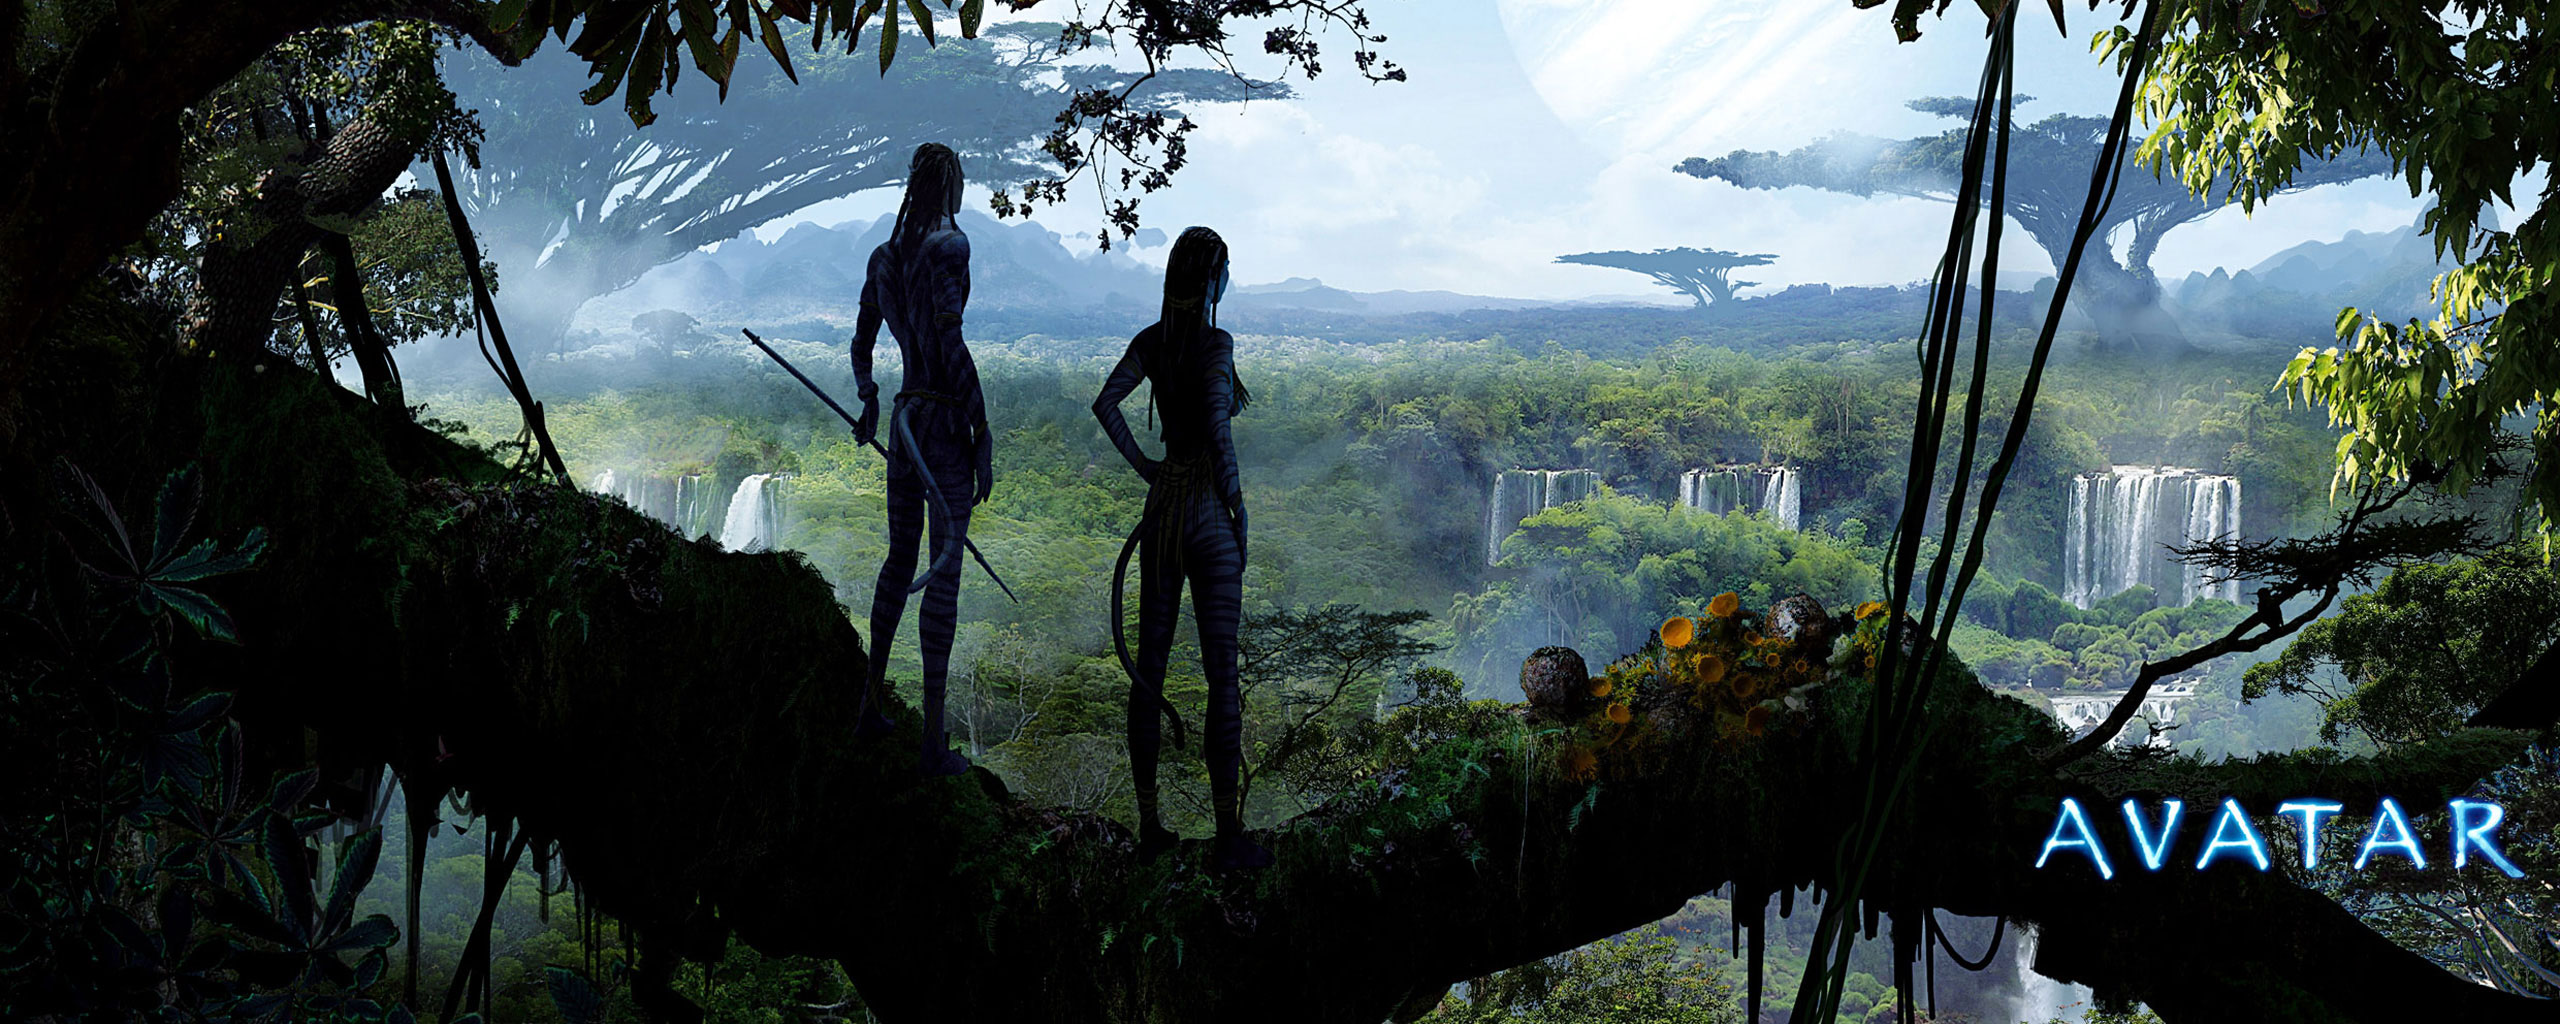 Avatar 2 wallpapers for desktop download free Avatar 2 pictures and  backgrounds for PC  moborg